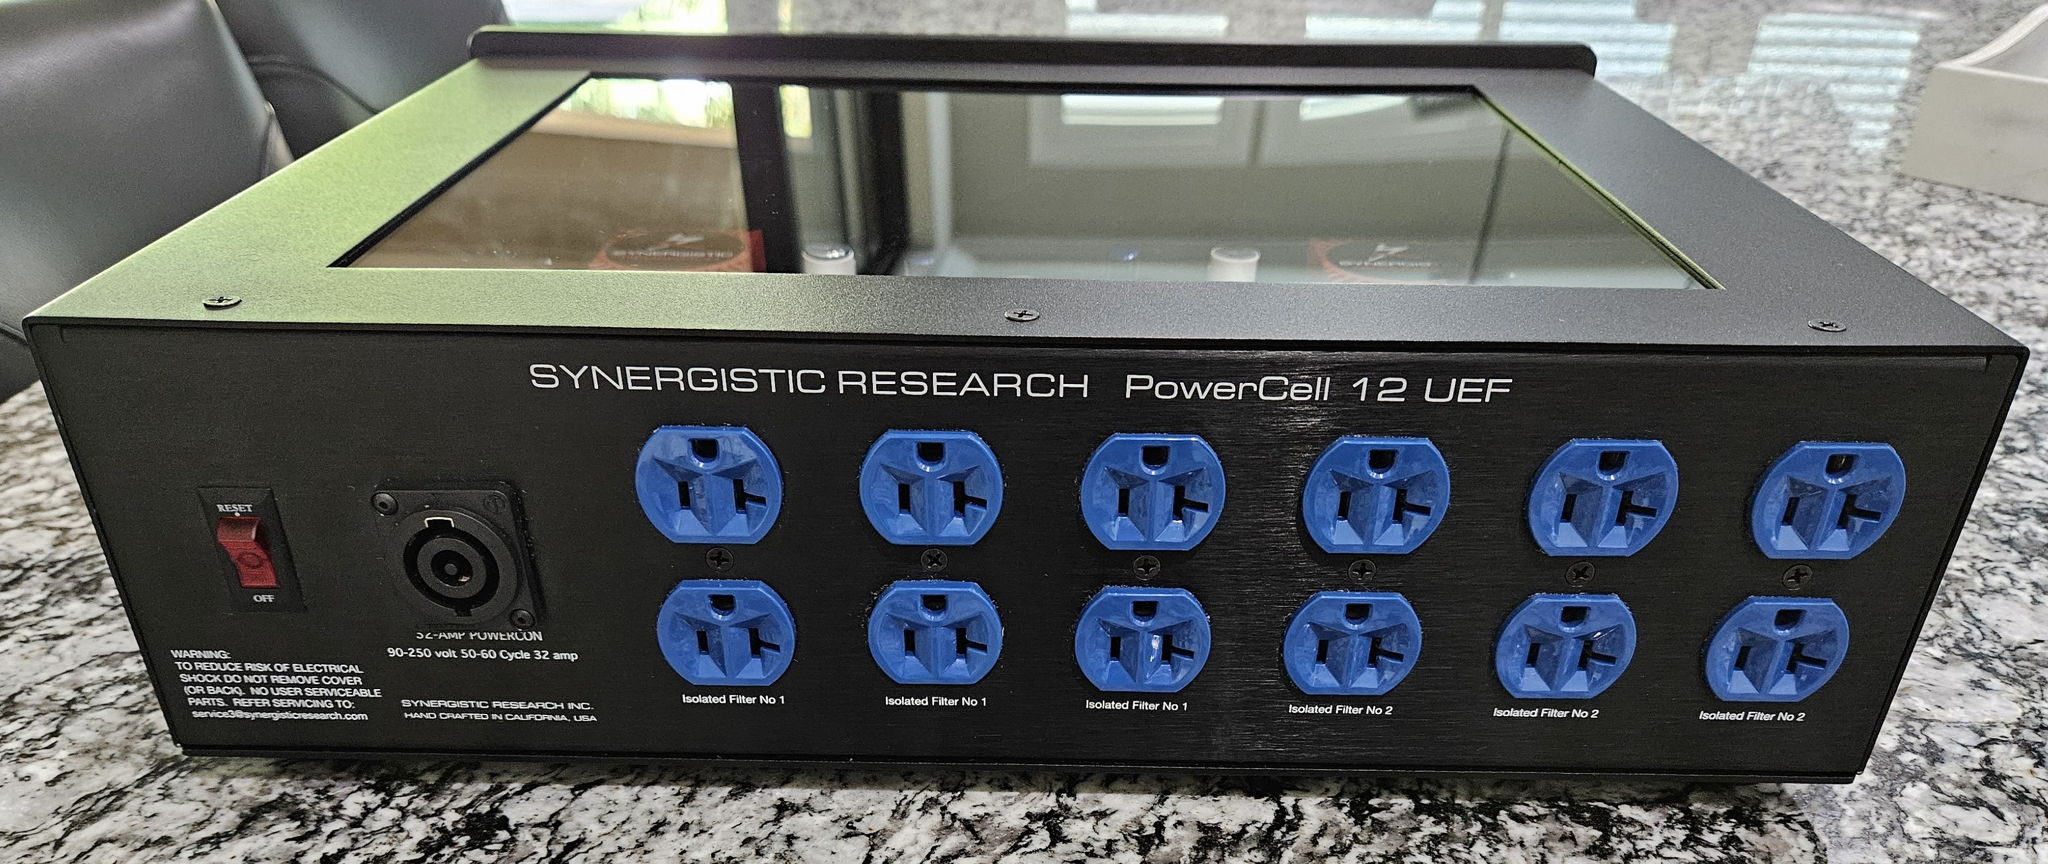 Synergistic Research PowerCell 12 UEF SE 5